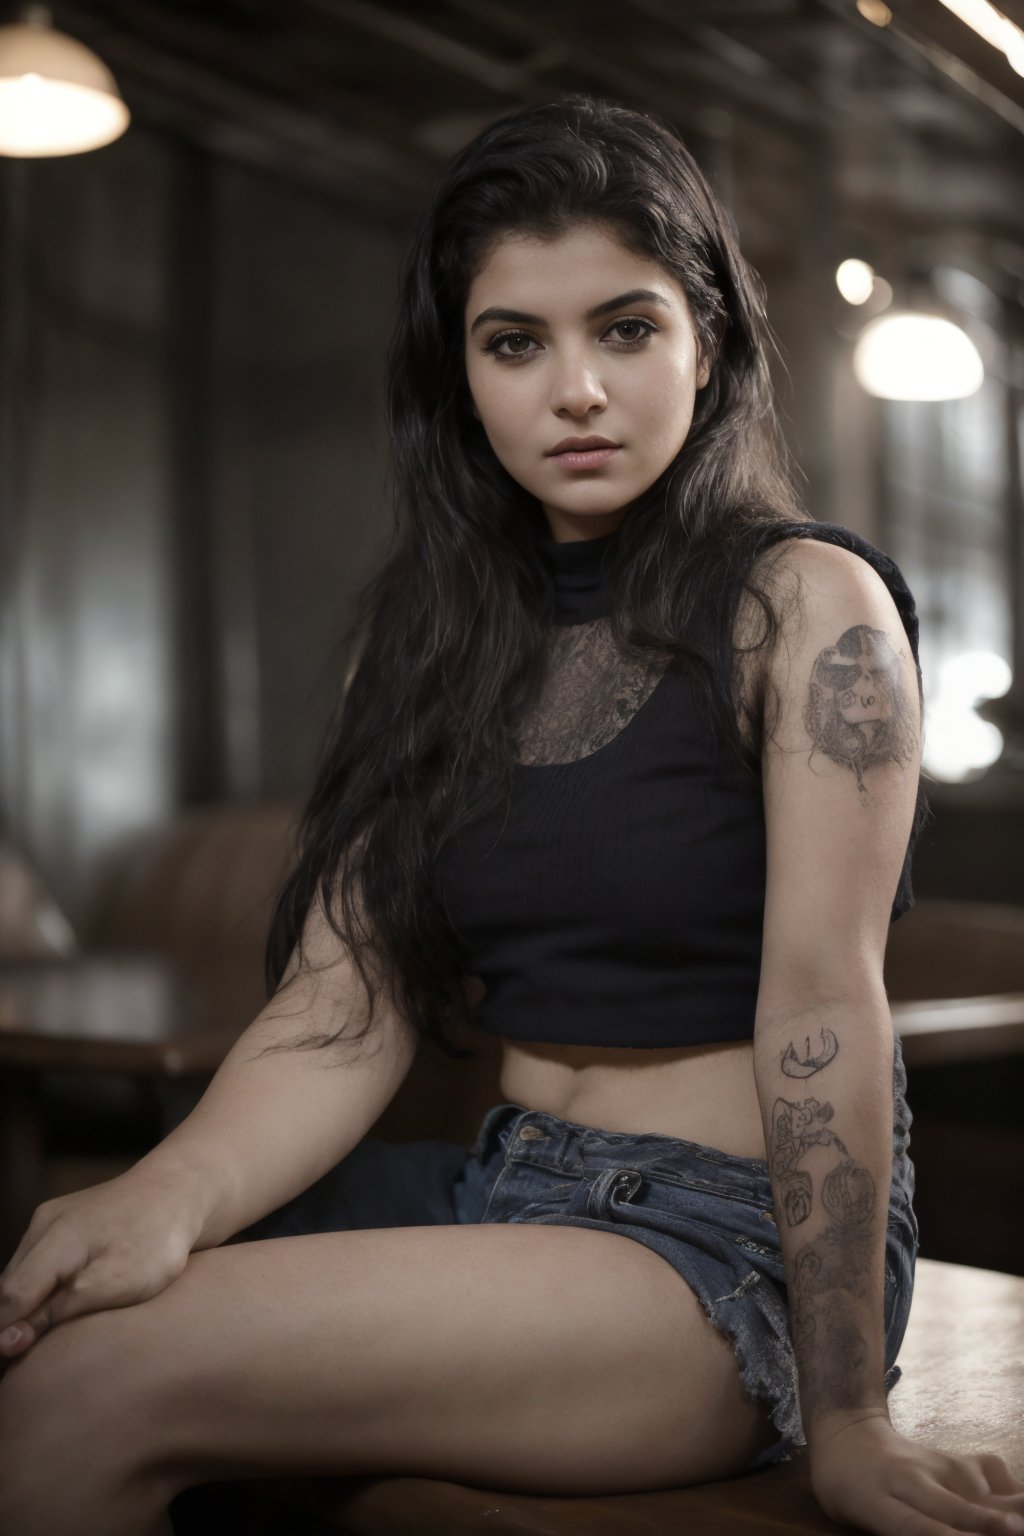 moody ethereal photography photo of a young angry (isidora_v2:0.95), croptop, textured skin, goosebumps, tattoos on her arms, sitting in a 50s diner, perfect eyes, (atmospheric lighting), bokeh, sharp focus on subject,kerala road,Plump